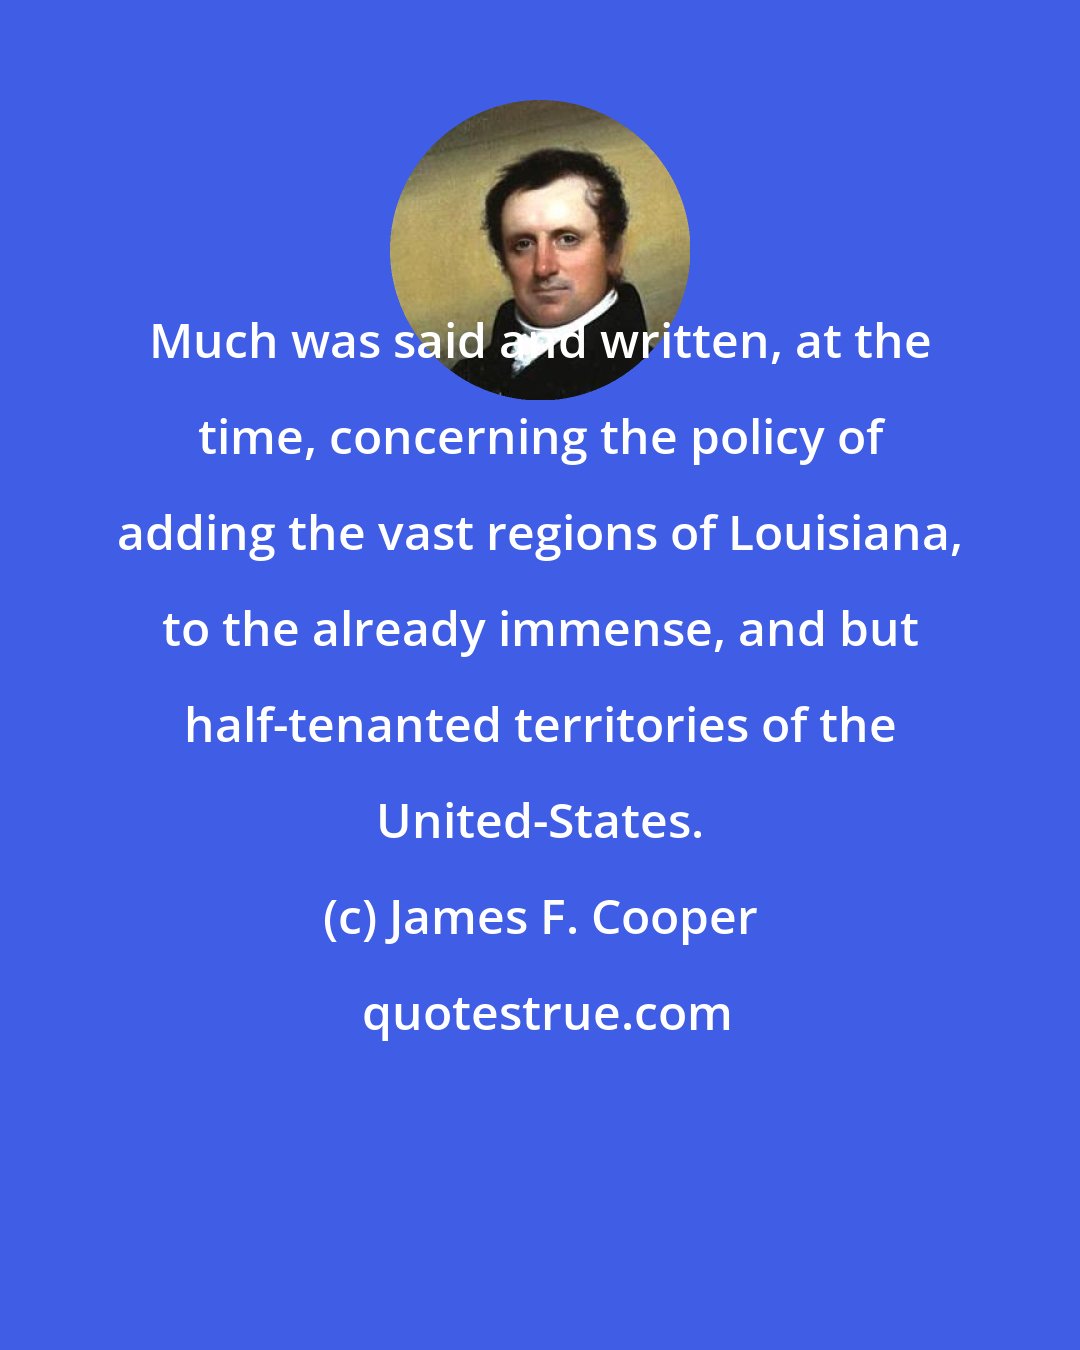 James F. Cooper: Much was said and written, at the time, concerning the policy of adding the vast regions of Louisiana, to the already immense, and but half-tenanted territories of the United-States.